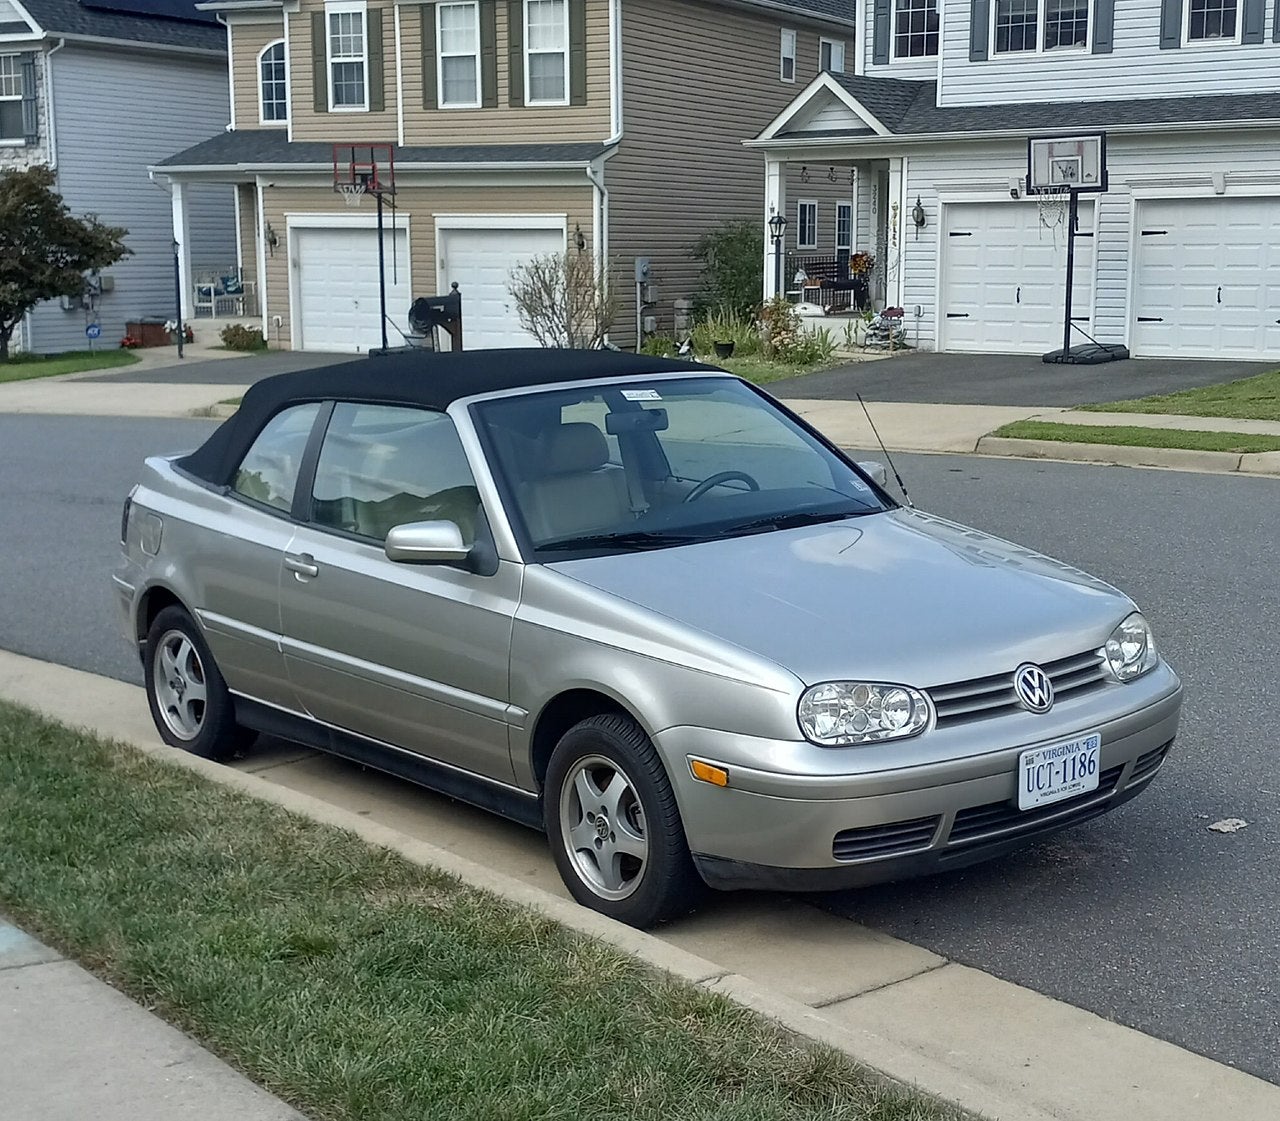 2001 VW Golf Cabriolet: The Official car of I wanted a beetle but I live in  a sensible part of town. : r/regularcarreviews